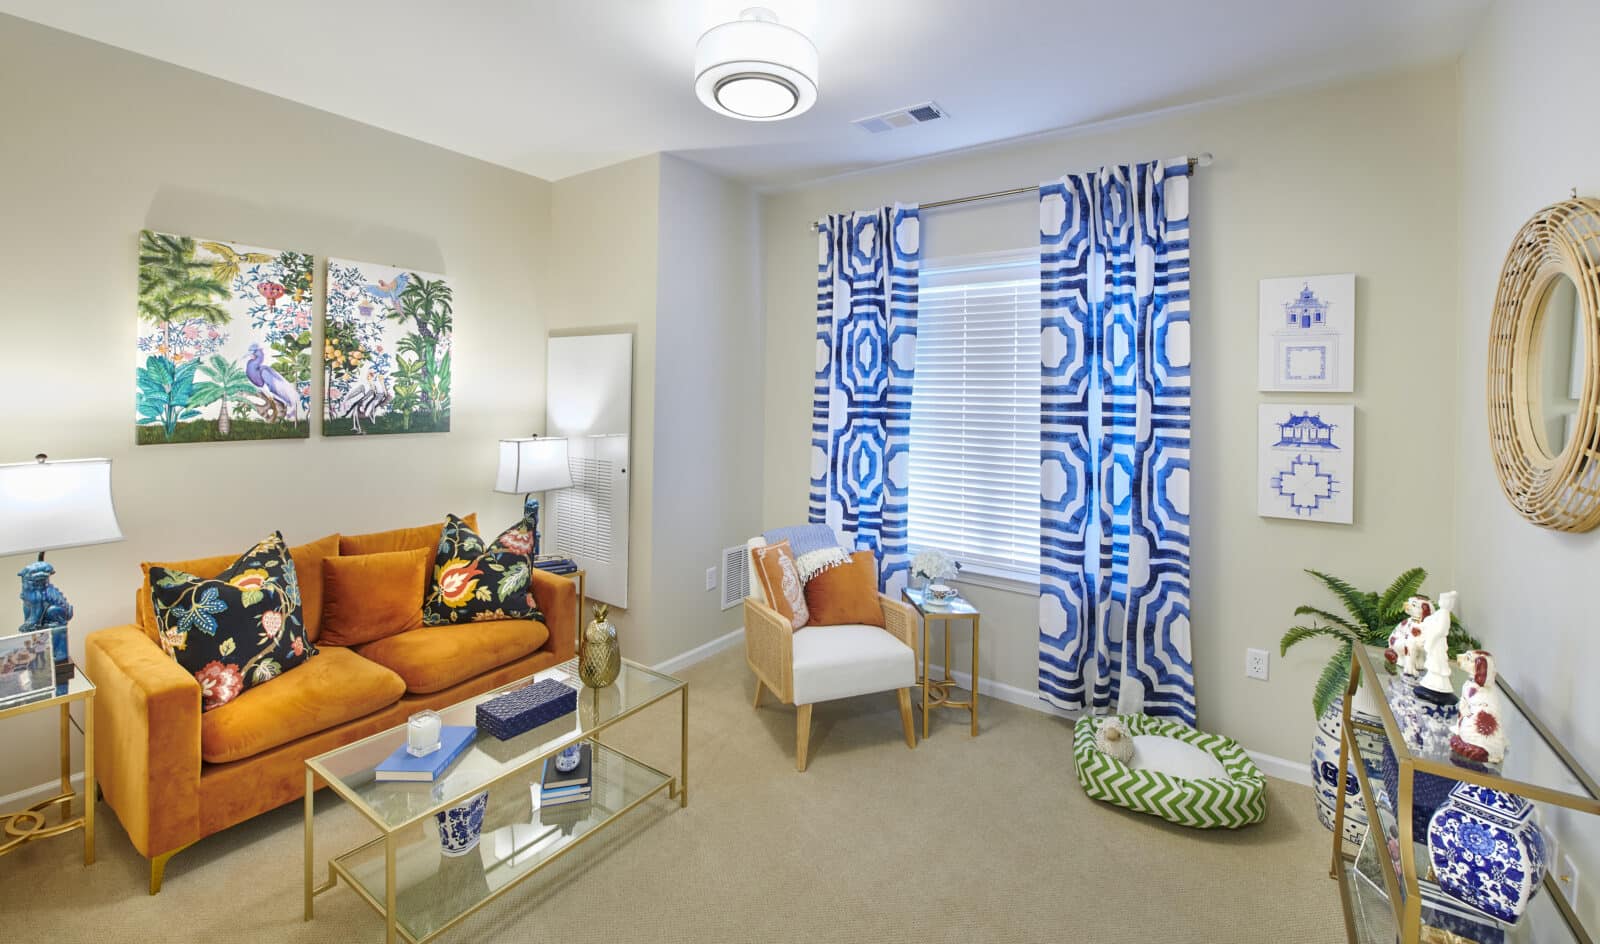 orange couch with black pillows with a color design and two prints above, blue and white window treatment